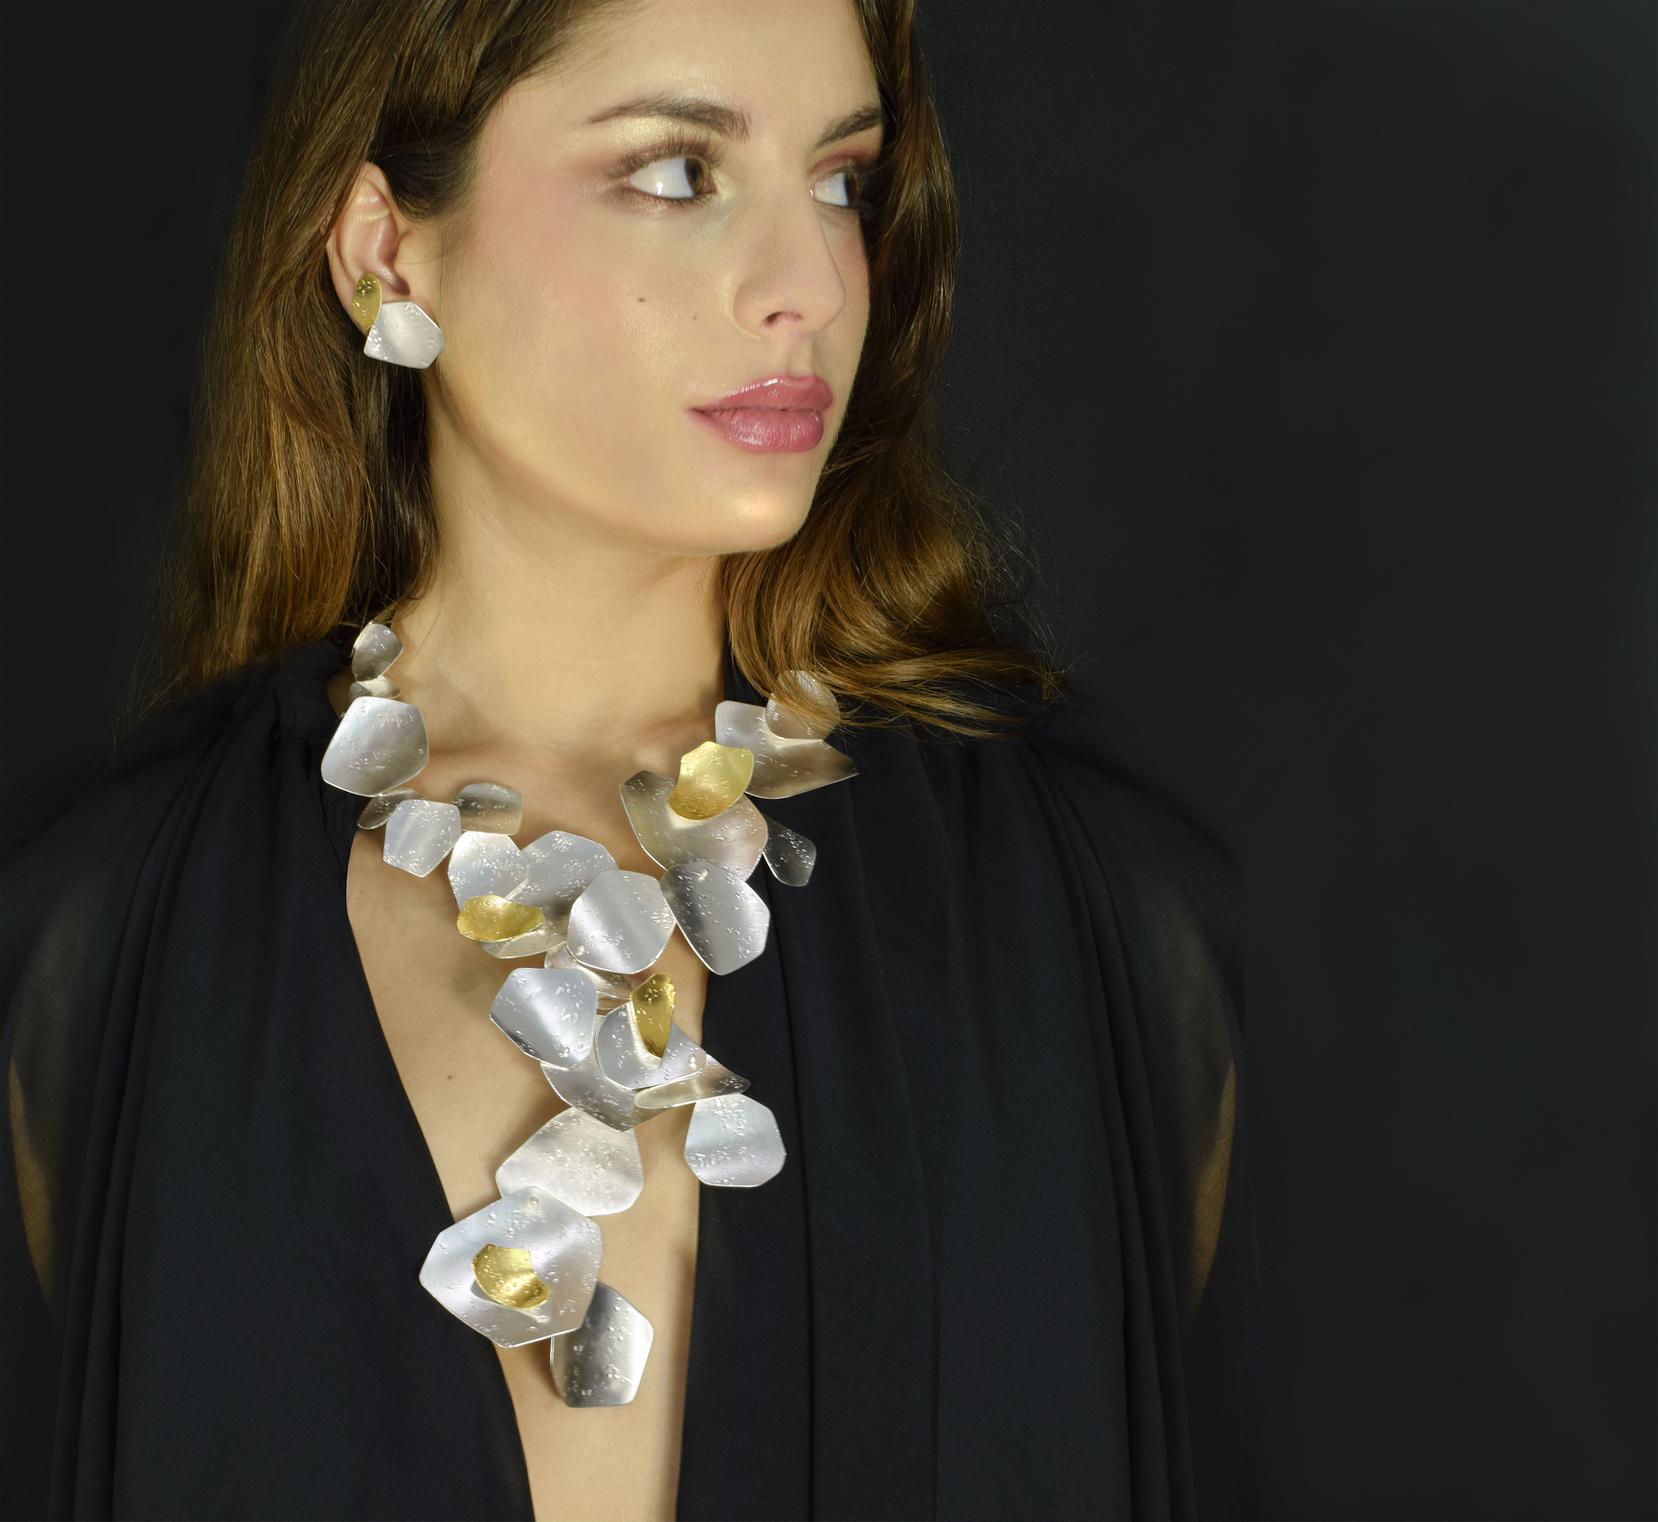 María Blondet shows her new jewelry collection